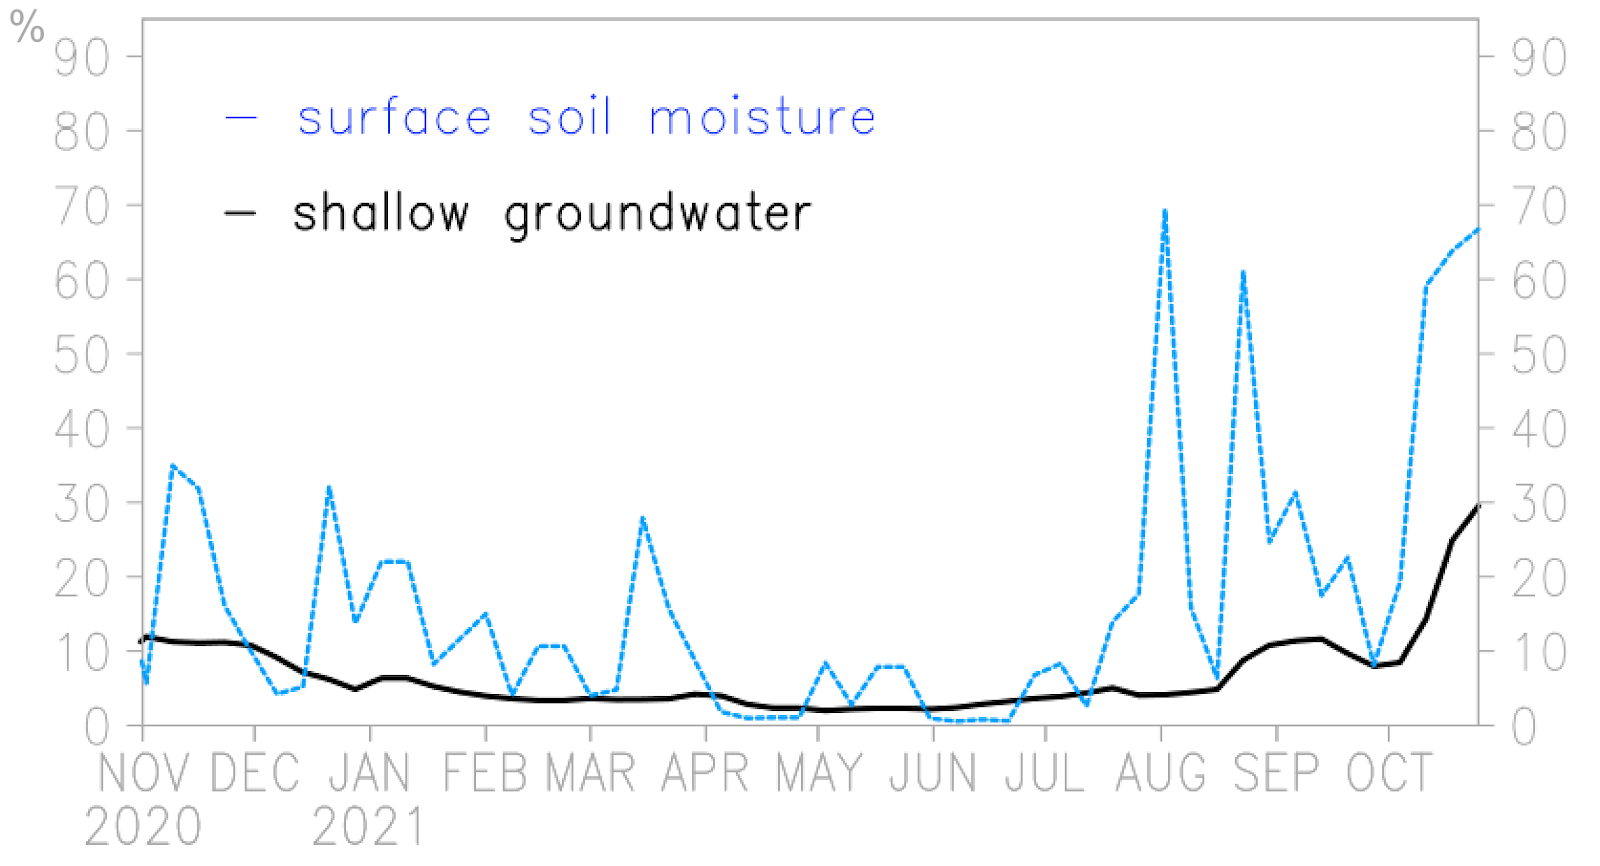 Time series of surface soil moisture and shallow groundwater averaged over the state of Utah. While recent soil moisture has increased rapidly, groundwater has been slow to increase.